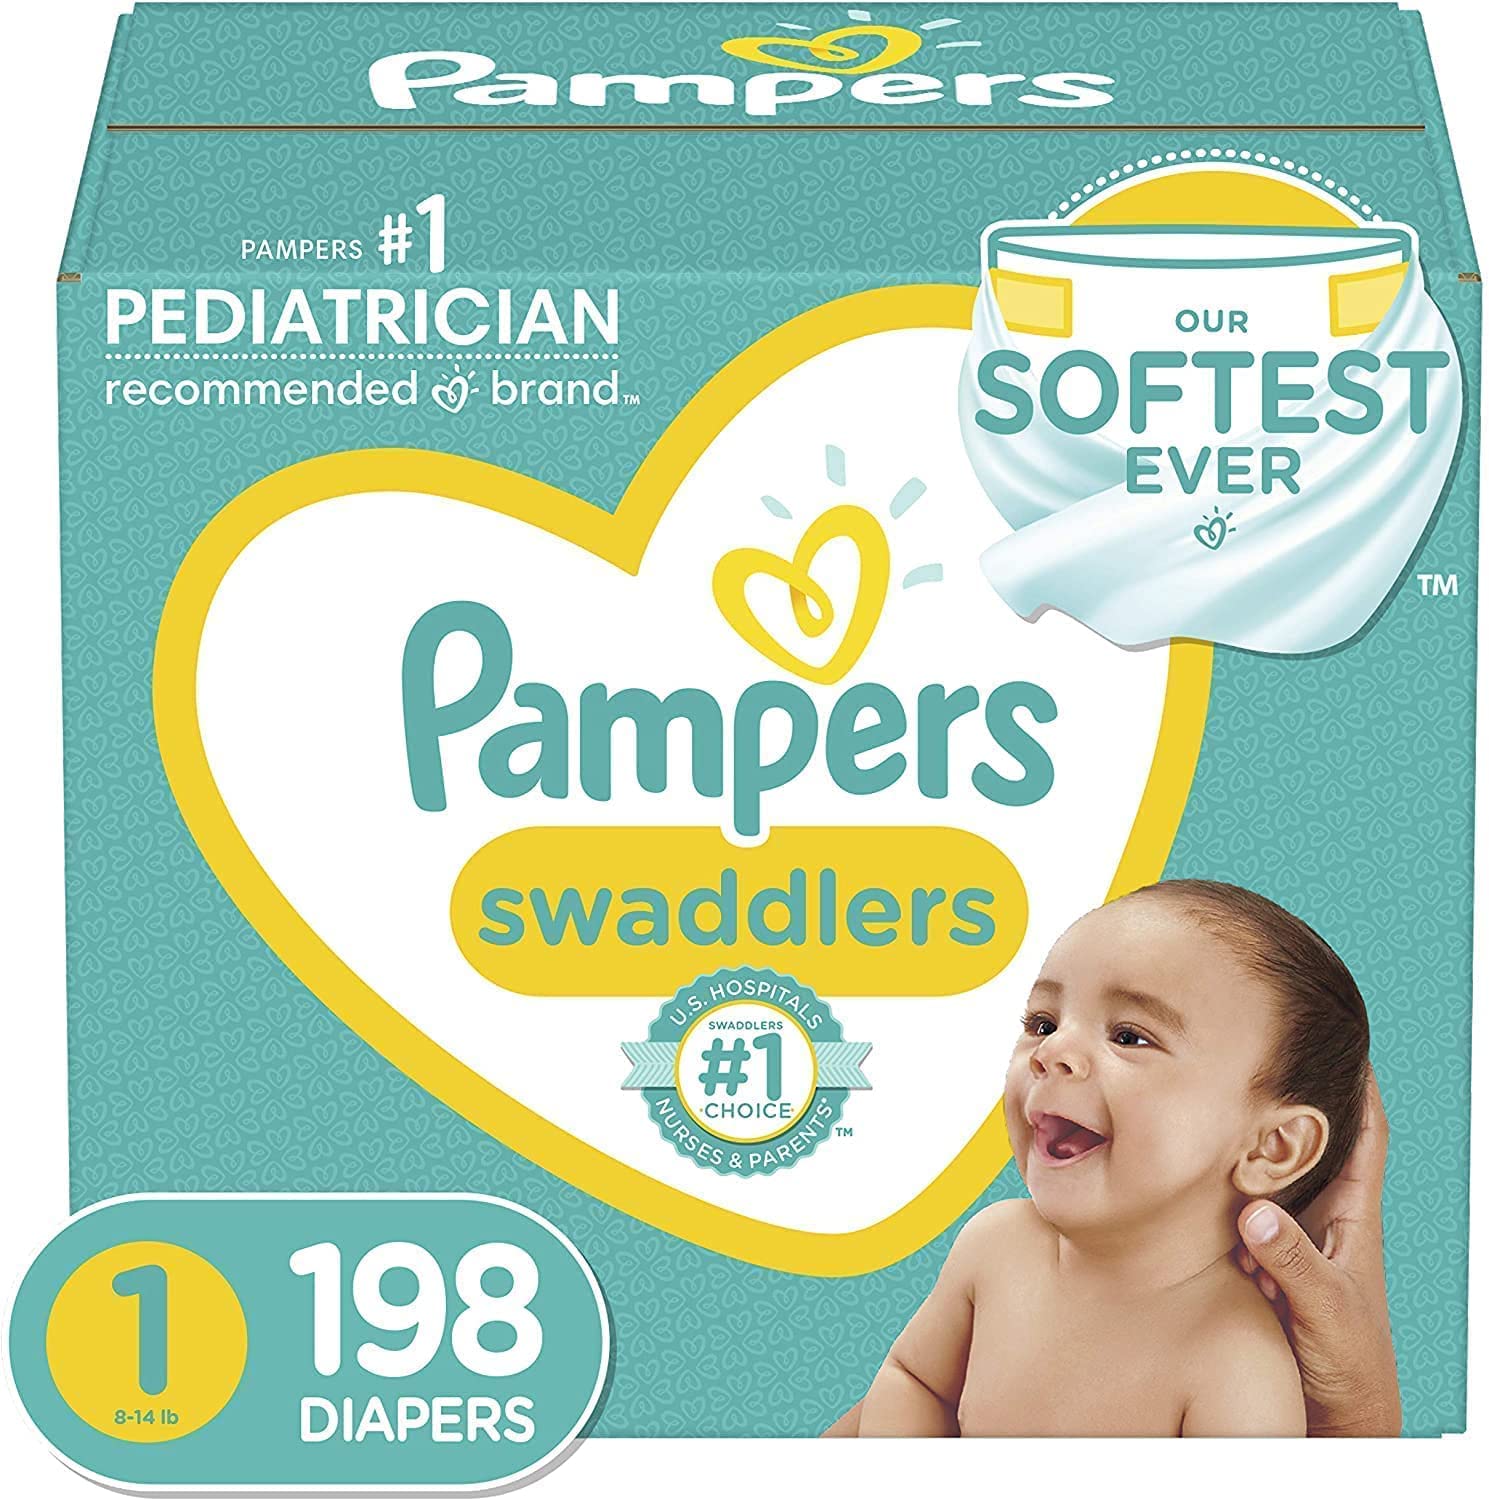 Pampers-Swaddlers-Diaper